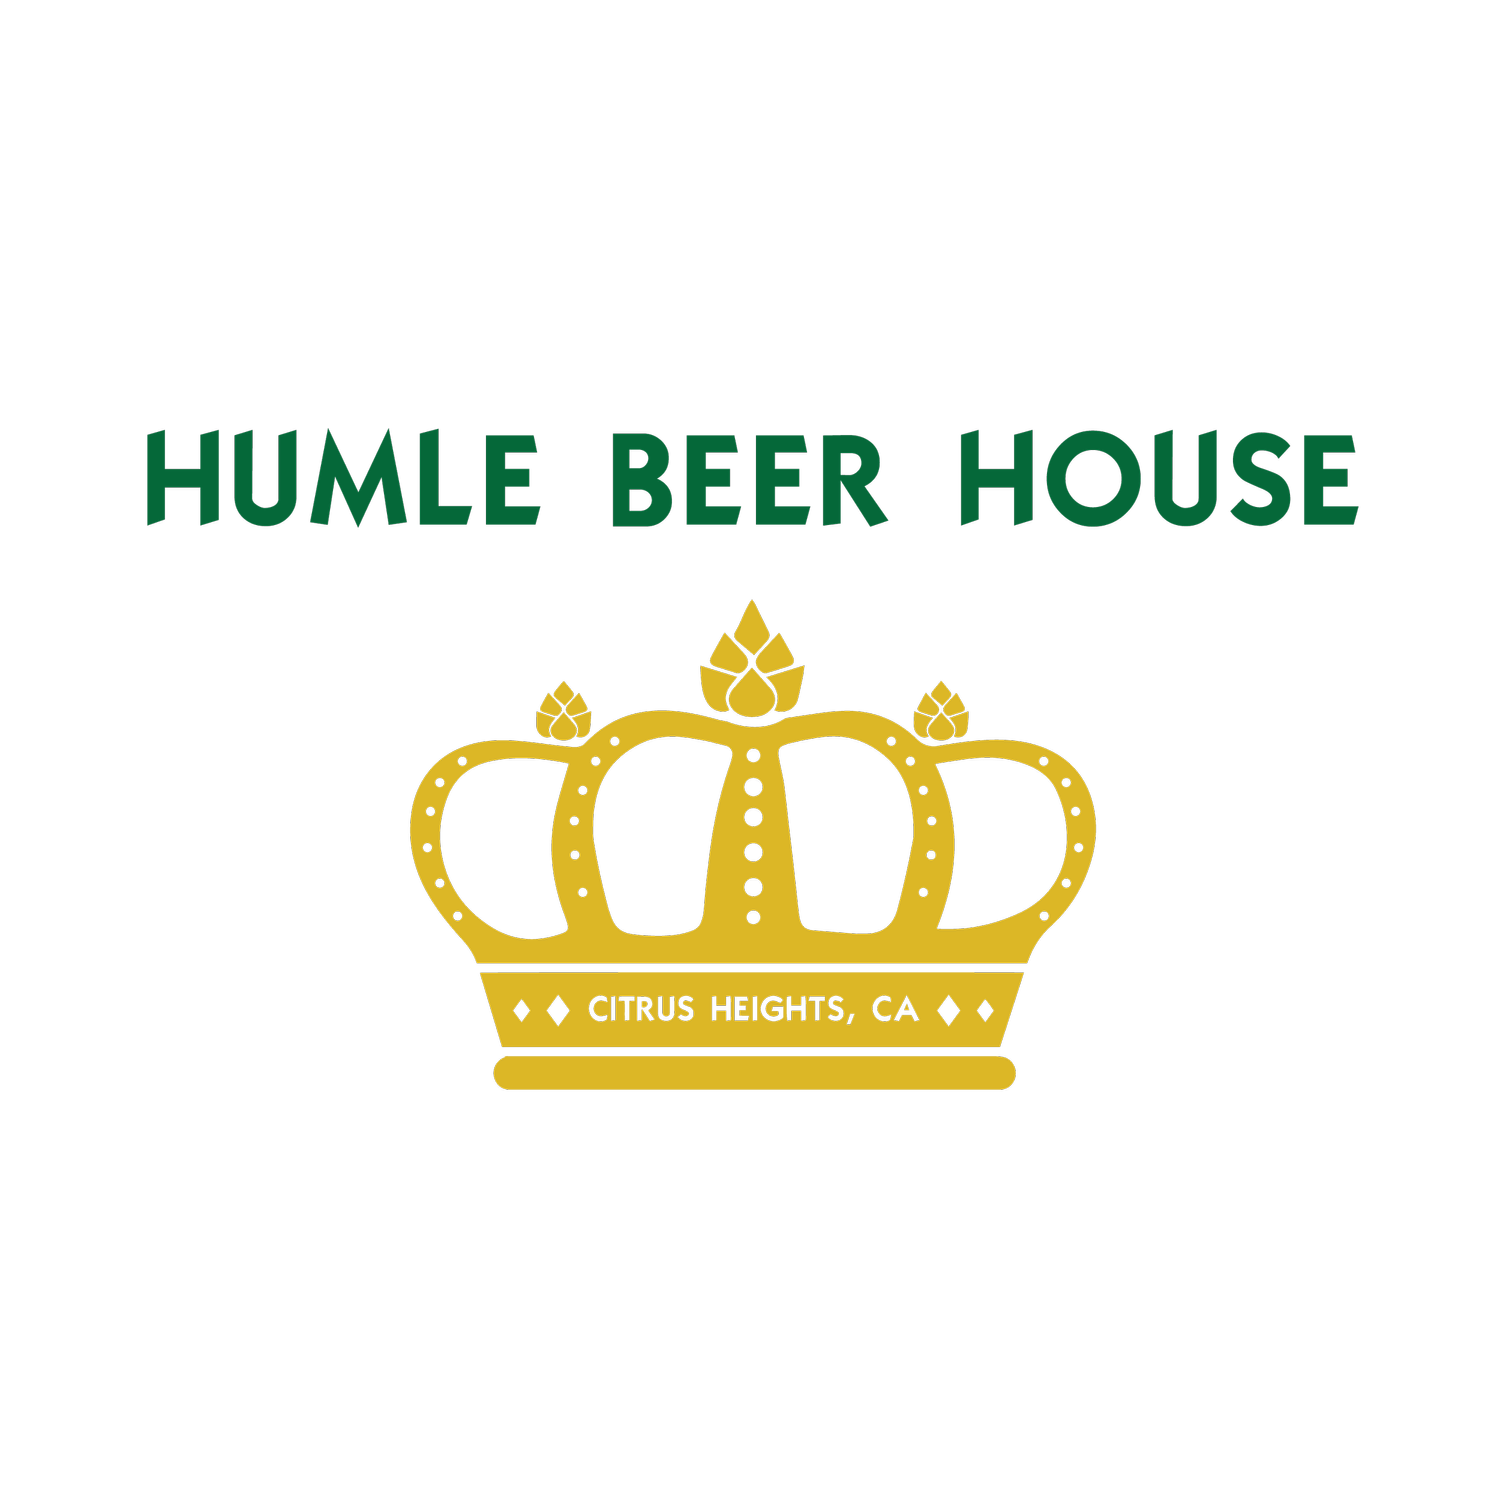 Humle Beer House